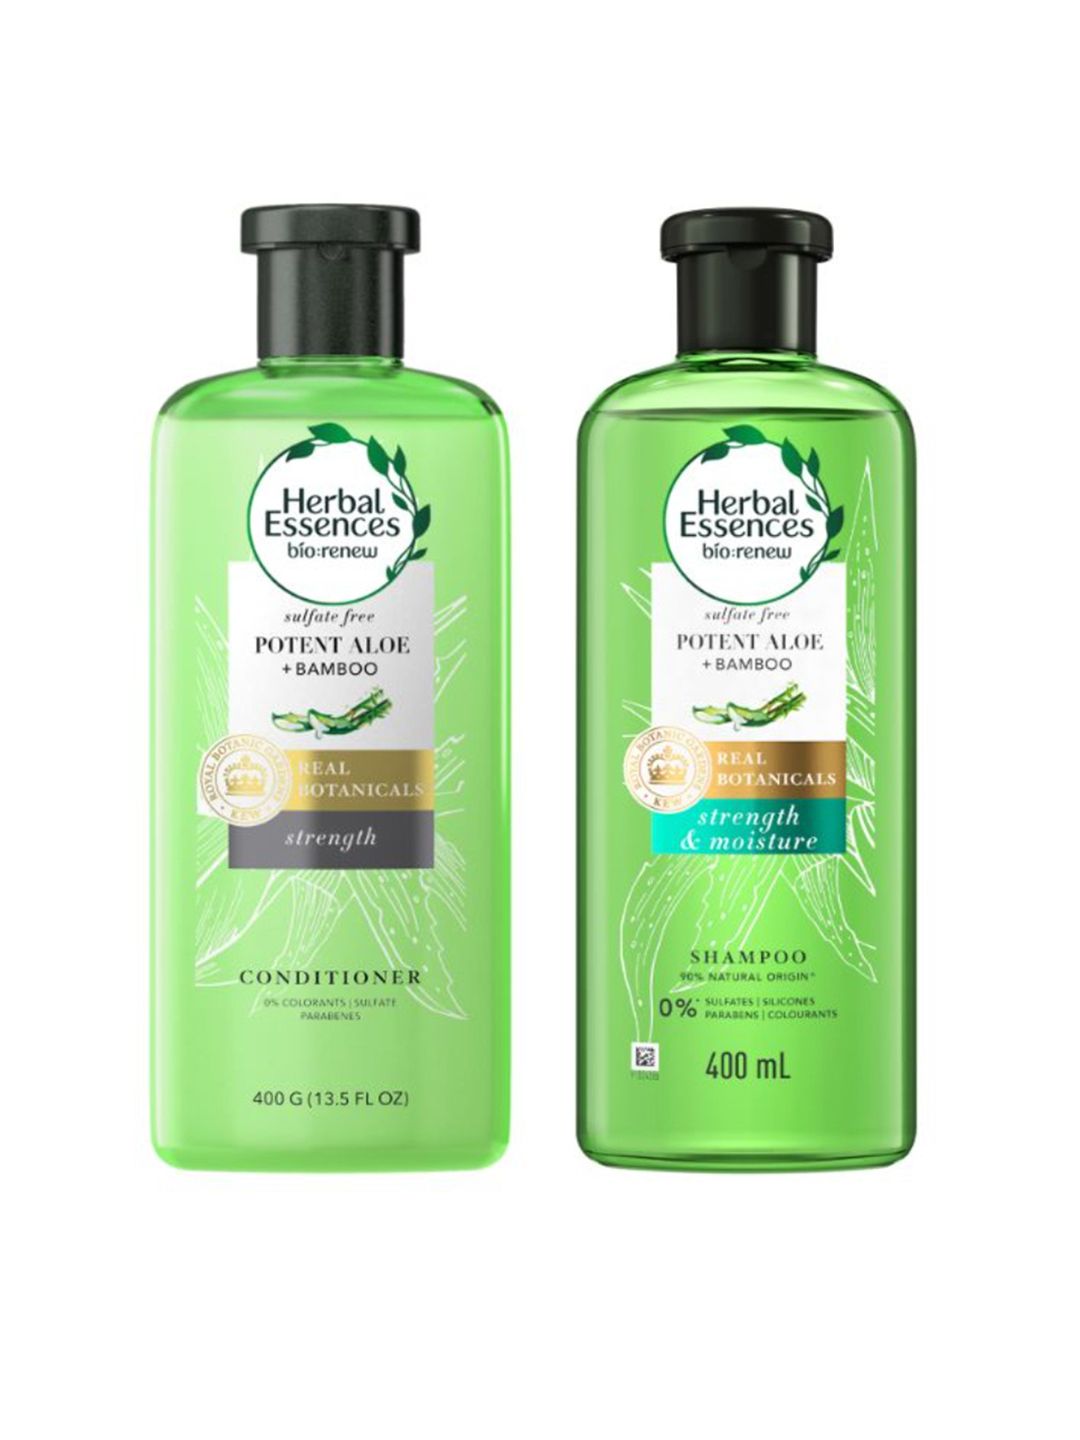 Herbal Essences Real Botanicals Potent Aloe & Bamboo Shampoo 400 ml & Conditioner 400 gm Price in India